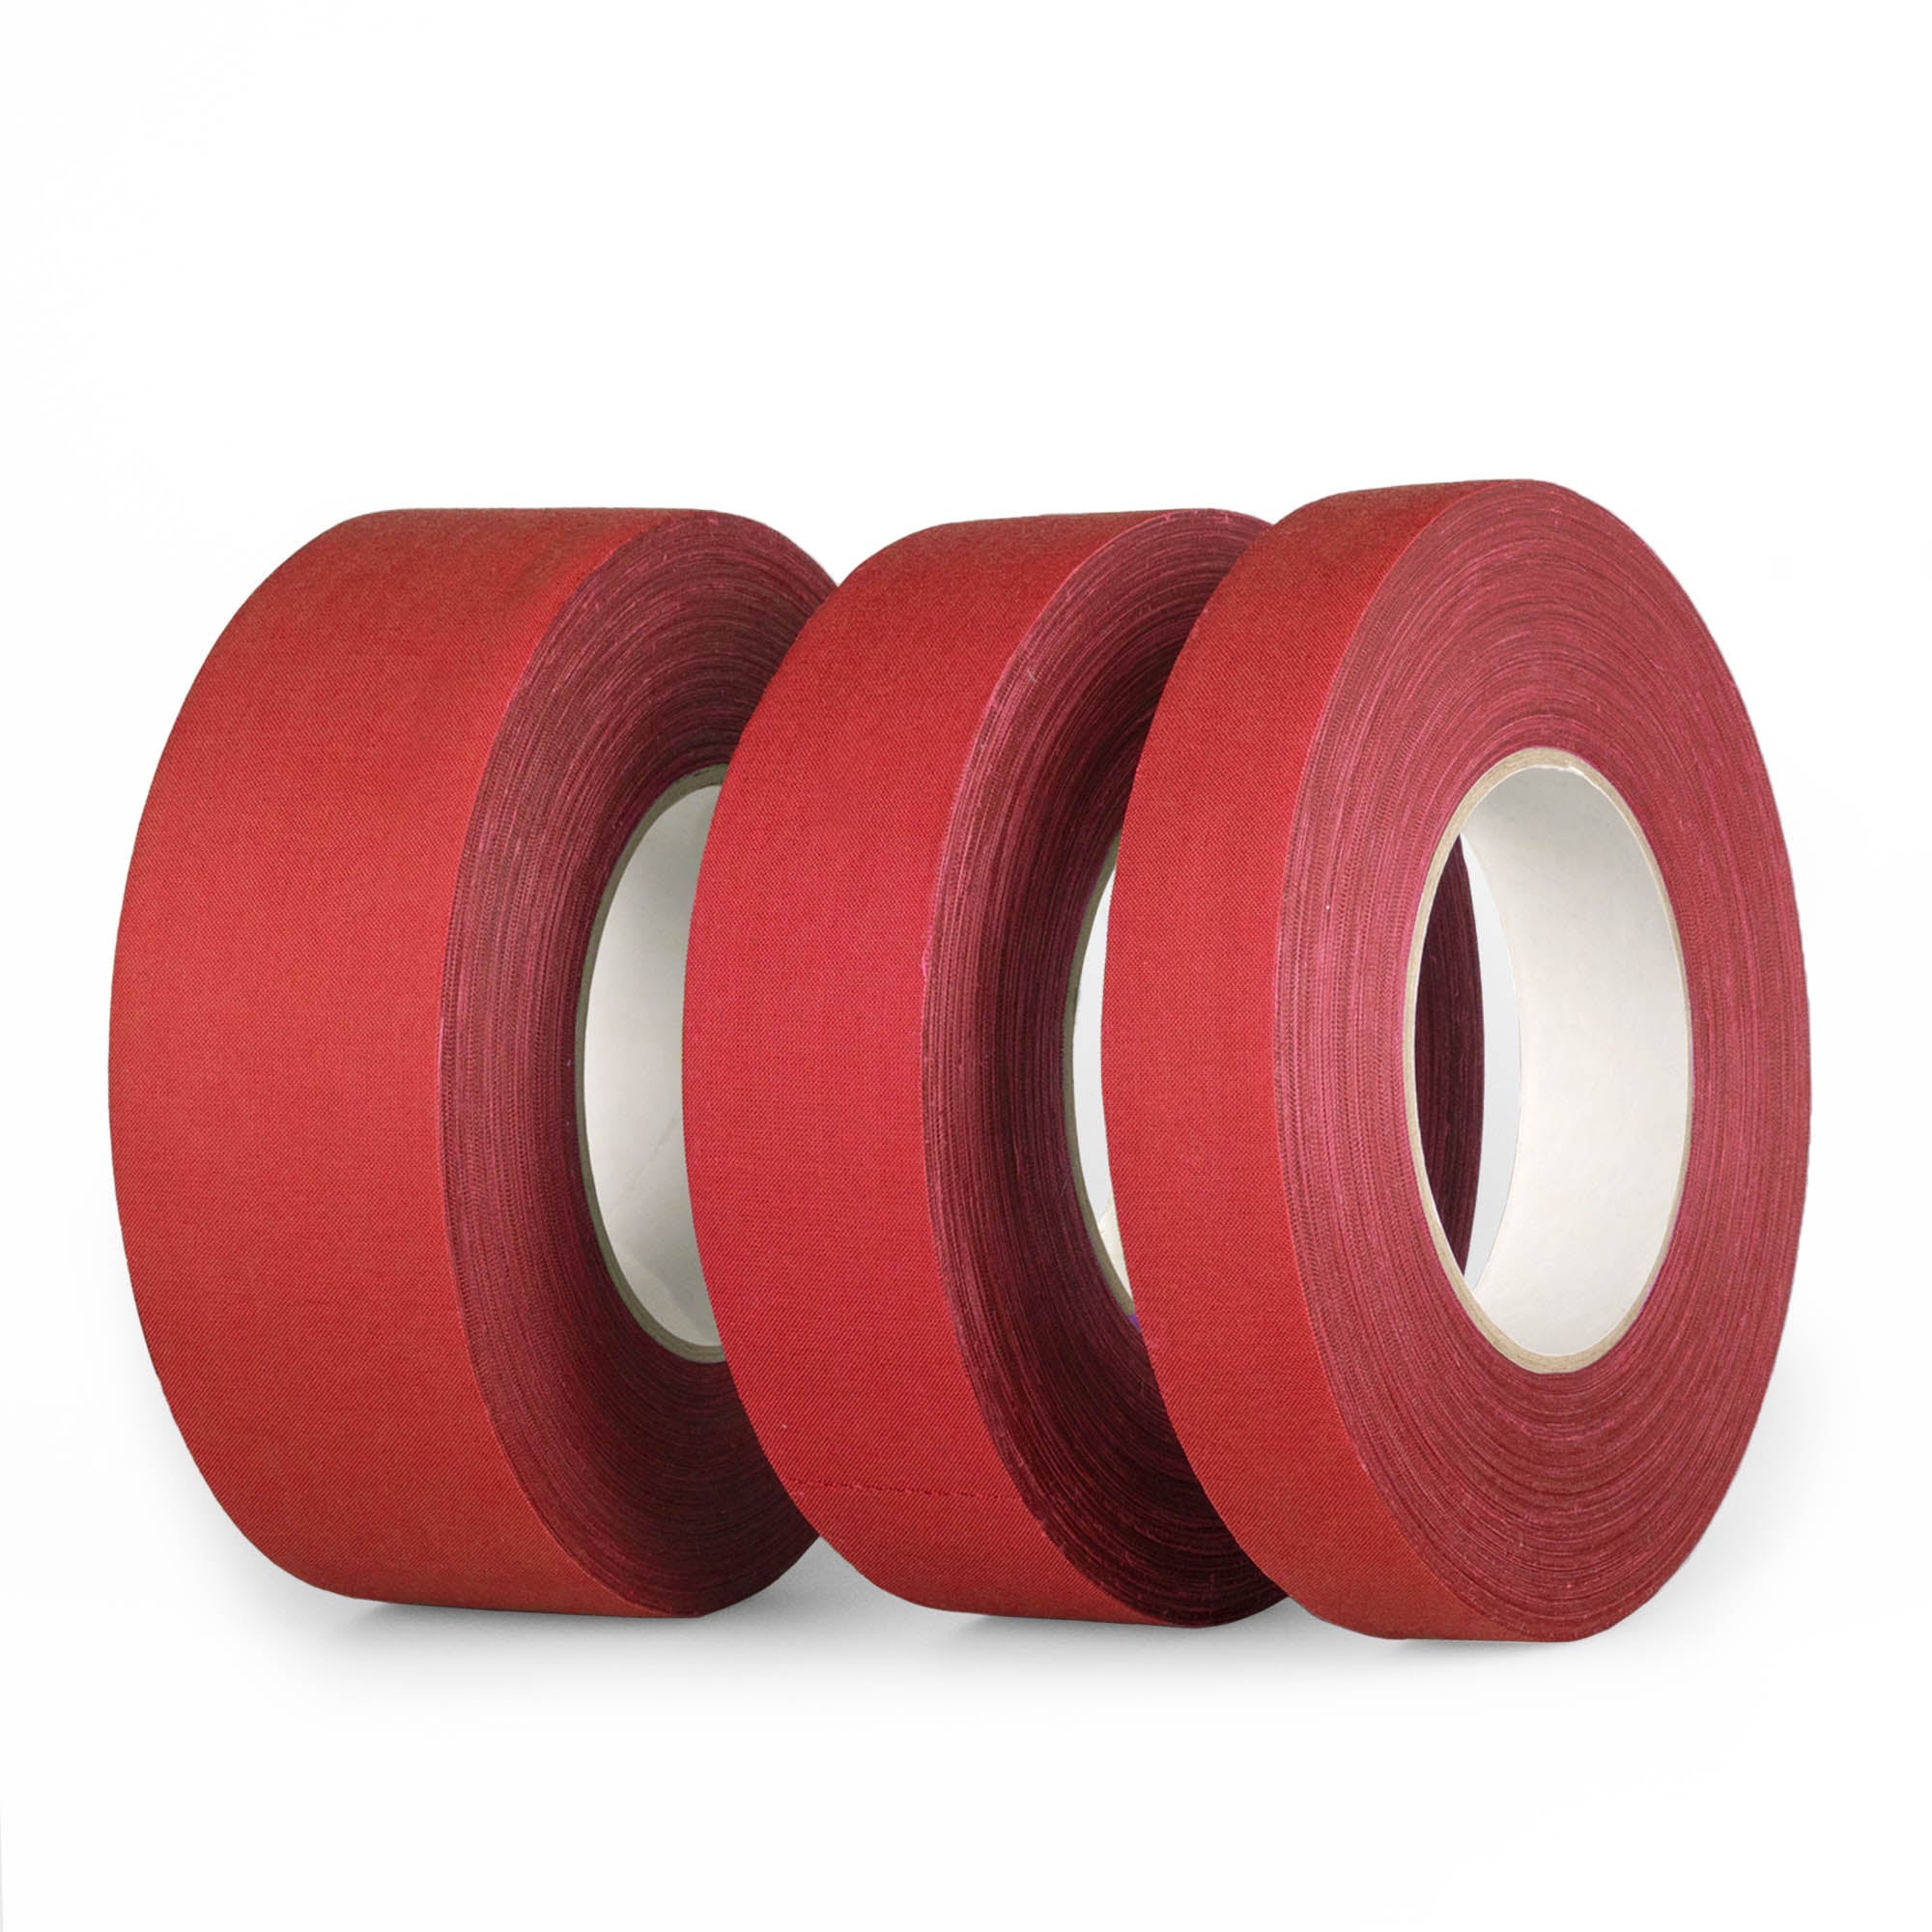 3 sizes of red tape